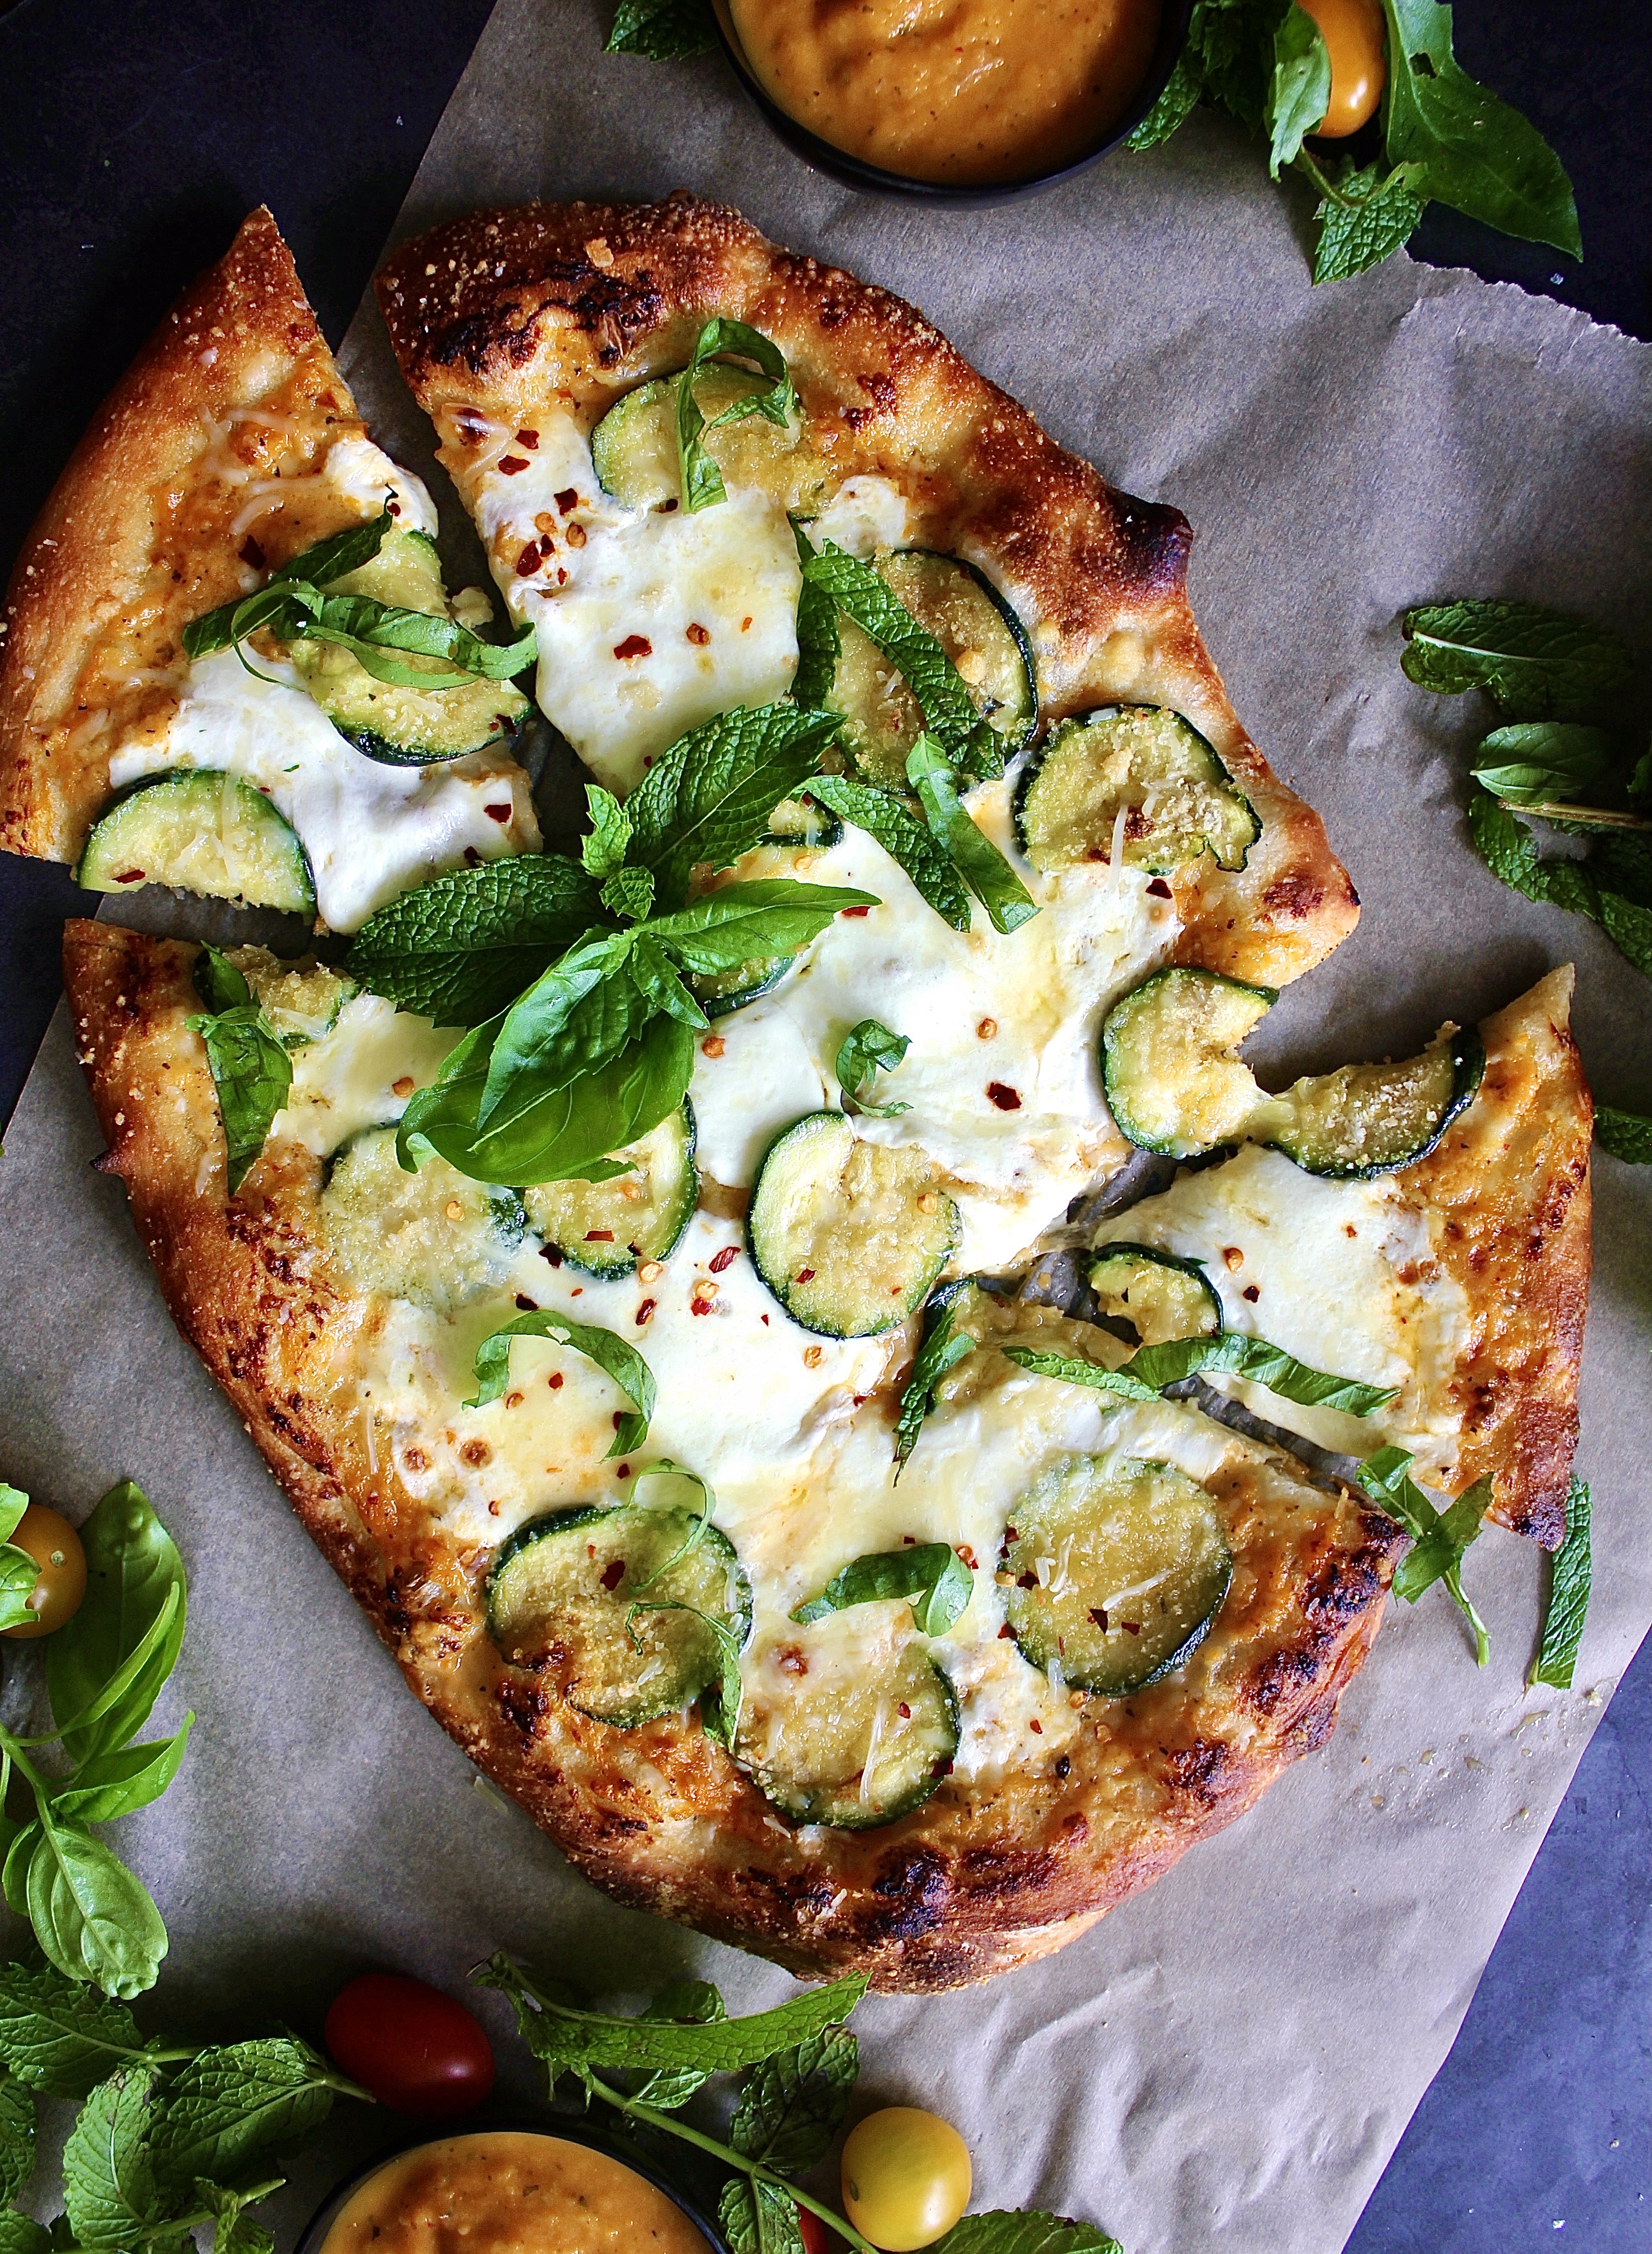  Fresh mozzarella and pecorino melted over a homemade yellow tomato sauce and finished off with crispy summer zucchini: this Pecorino Crusted Yellow Pizza with Crispy Zucchini is truly the best summer pizza.